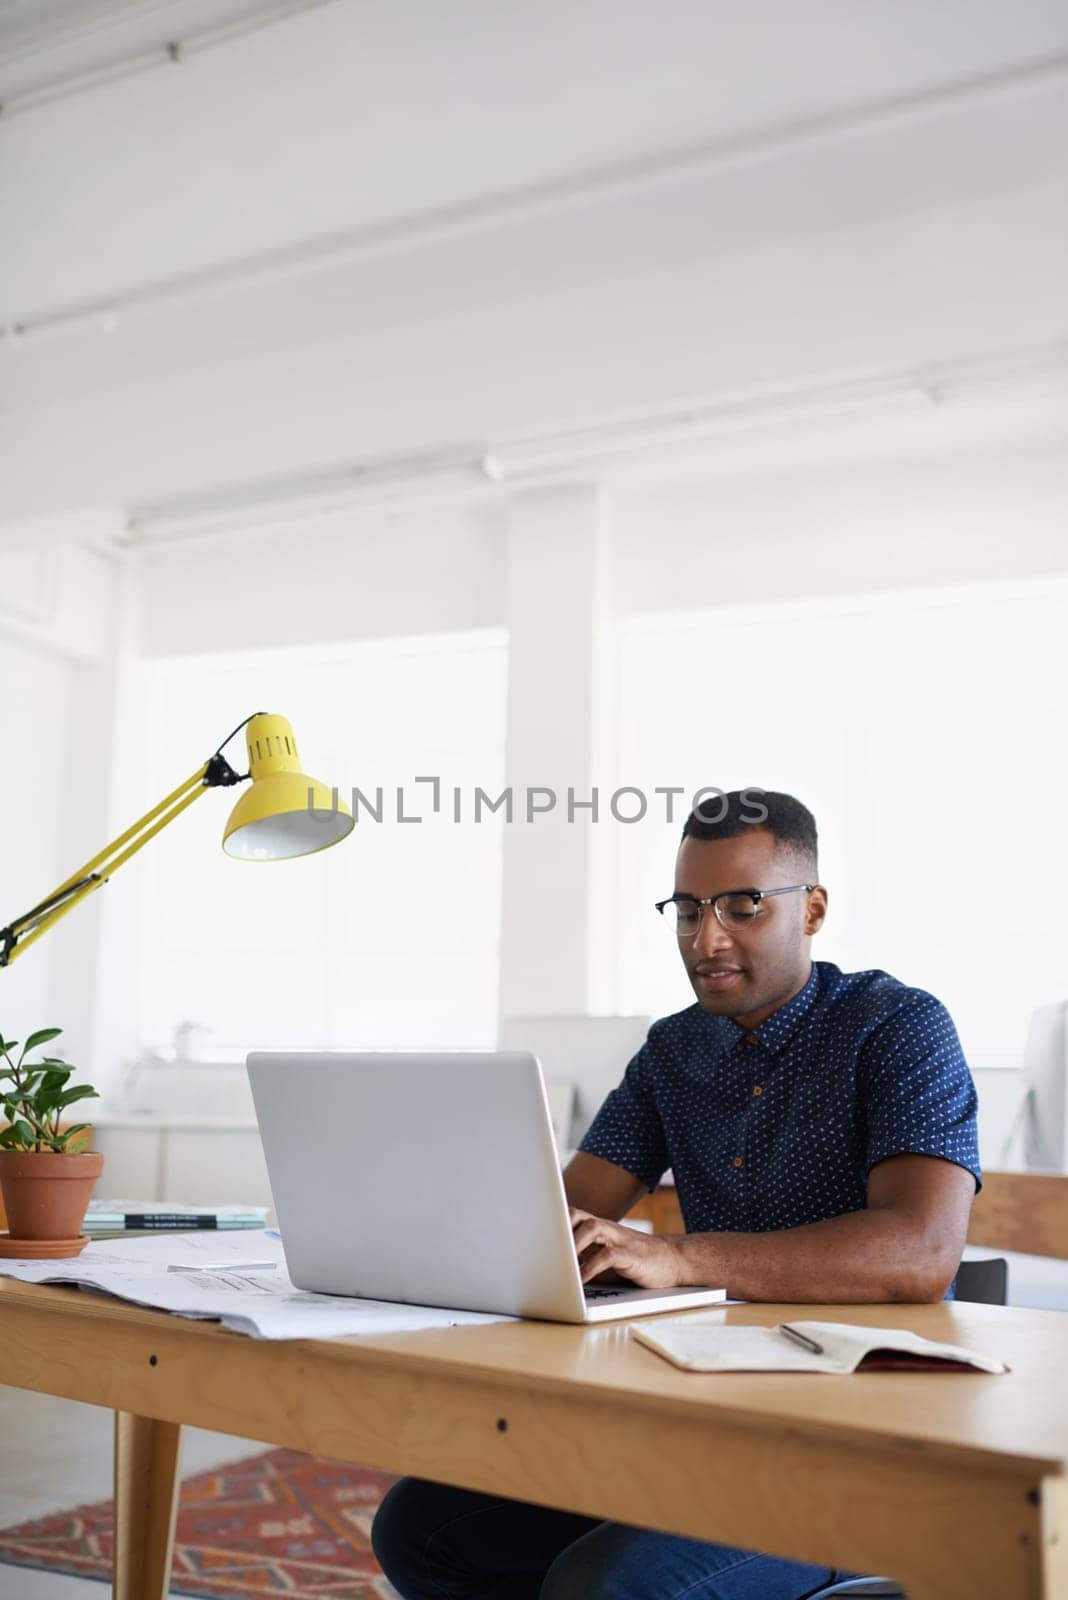 Journalist, typing or black man with laptop for research working on online business or copywriting. Computer, digital agency or focused worker searching for blog content, reports or internet article.